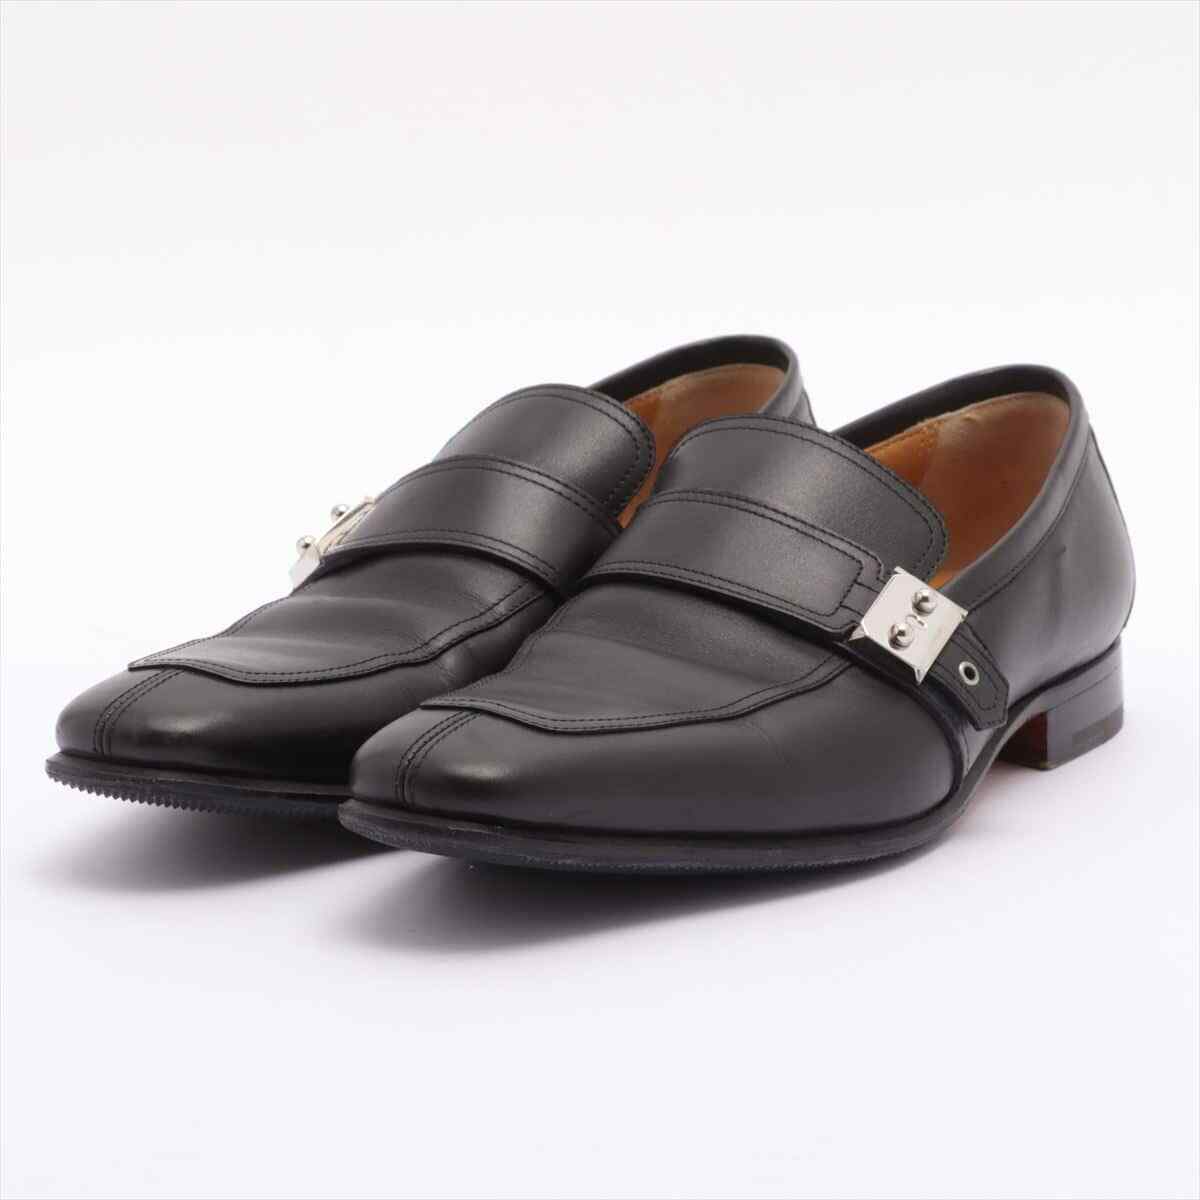 Hermes Leather Leather Shoes 40 1/2 Men's Black Sole Repaired